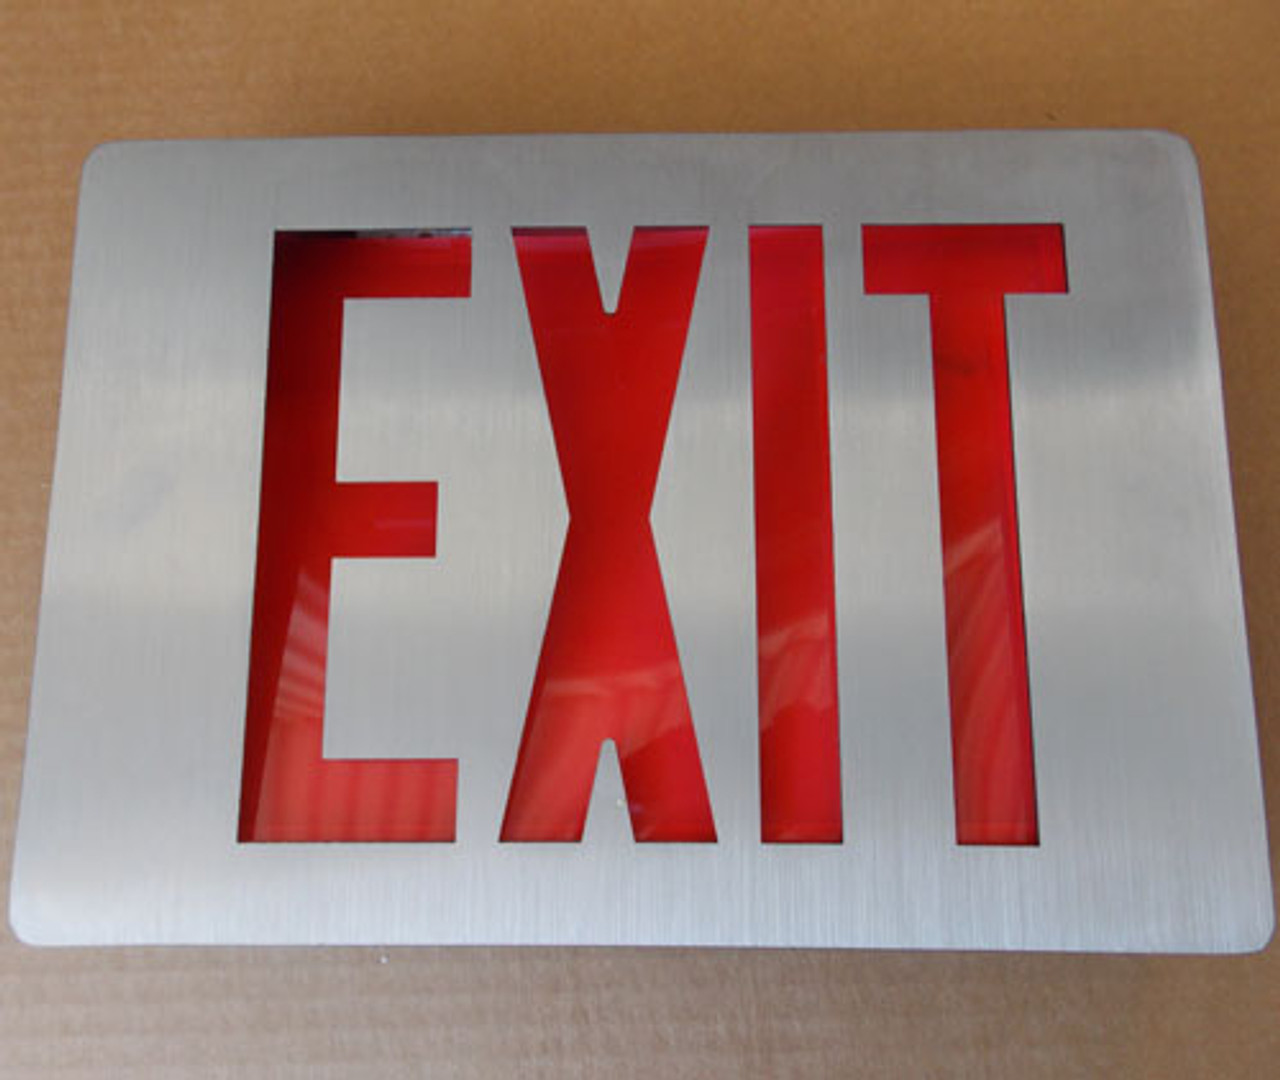 Lithonia LE S 1R 120/277 ELN Emergency LED Exit Sign Red Letter - New